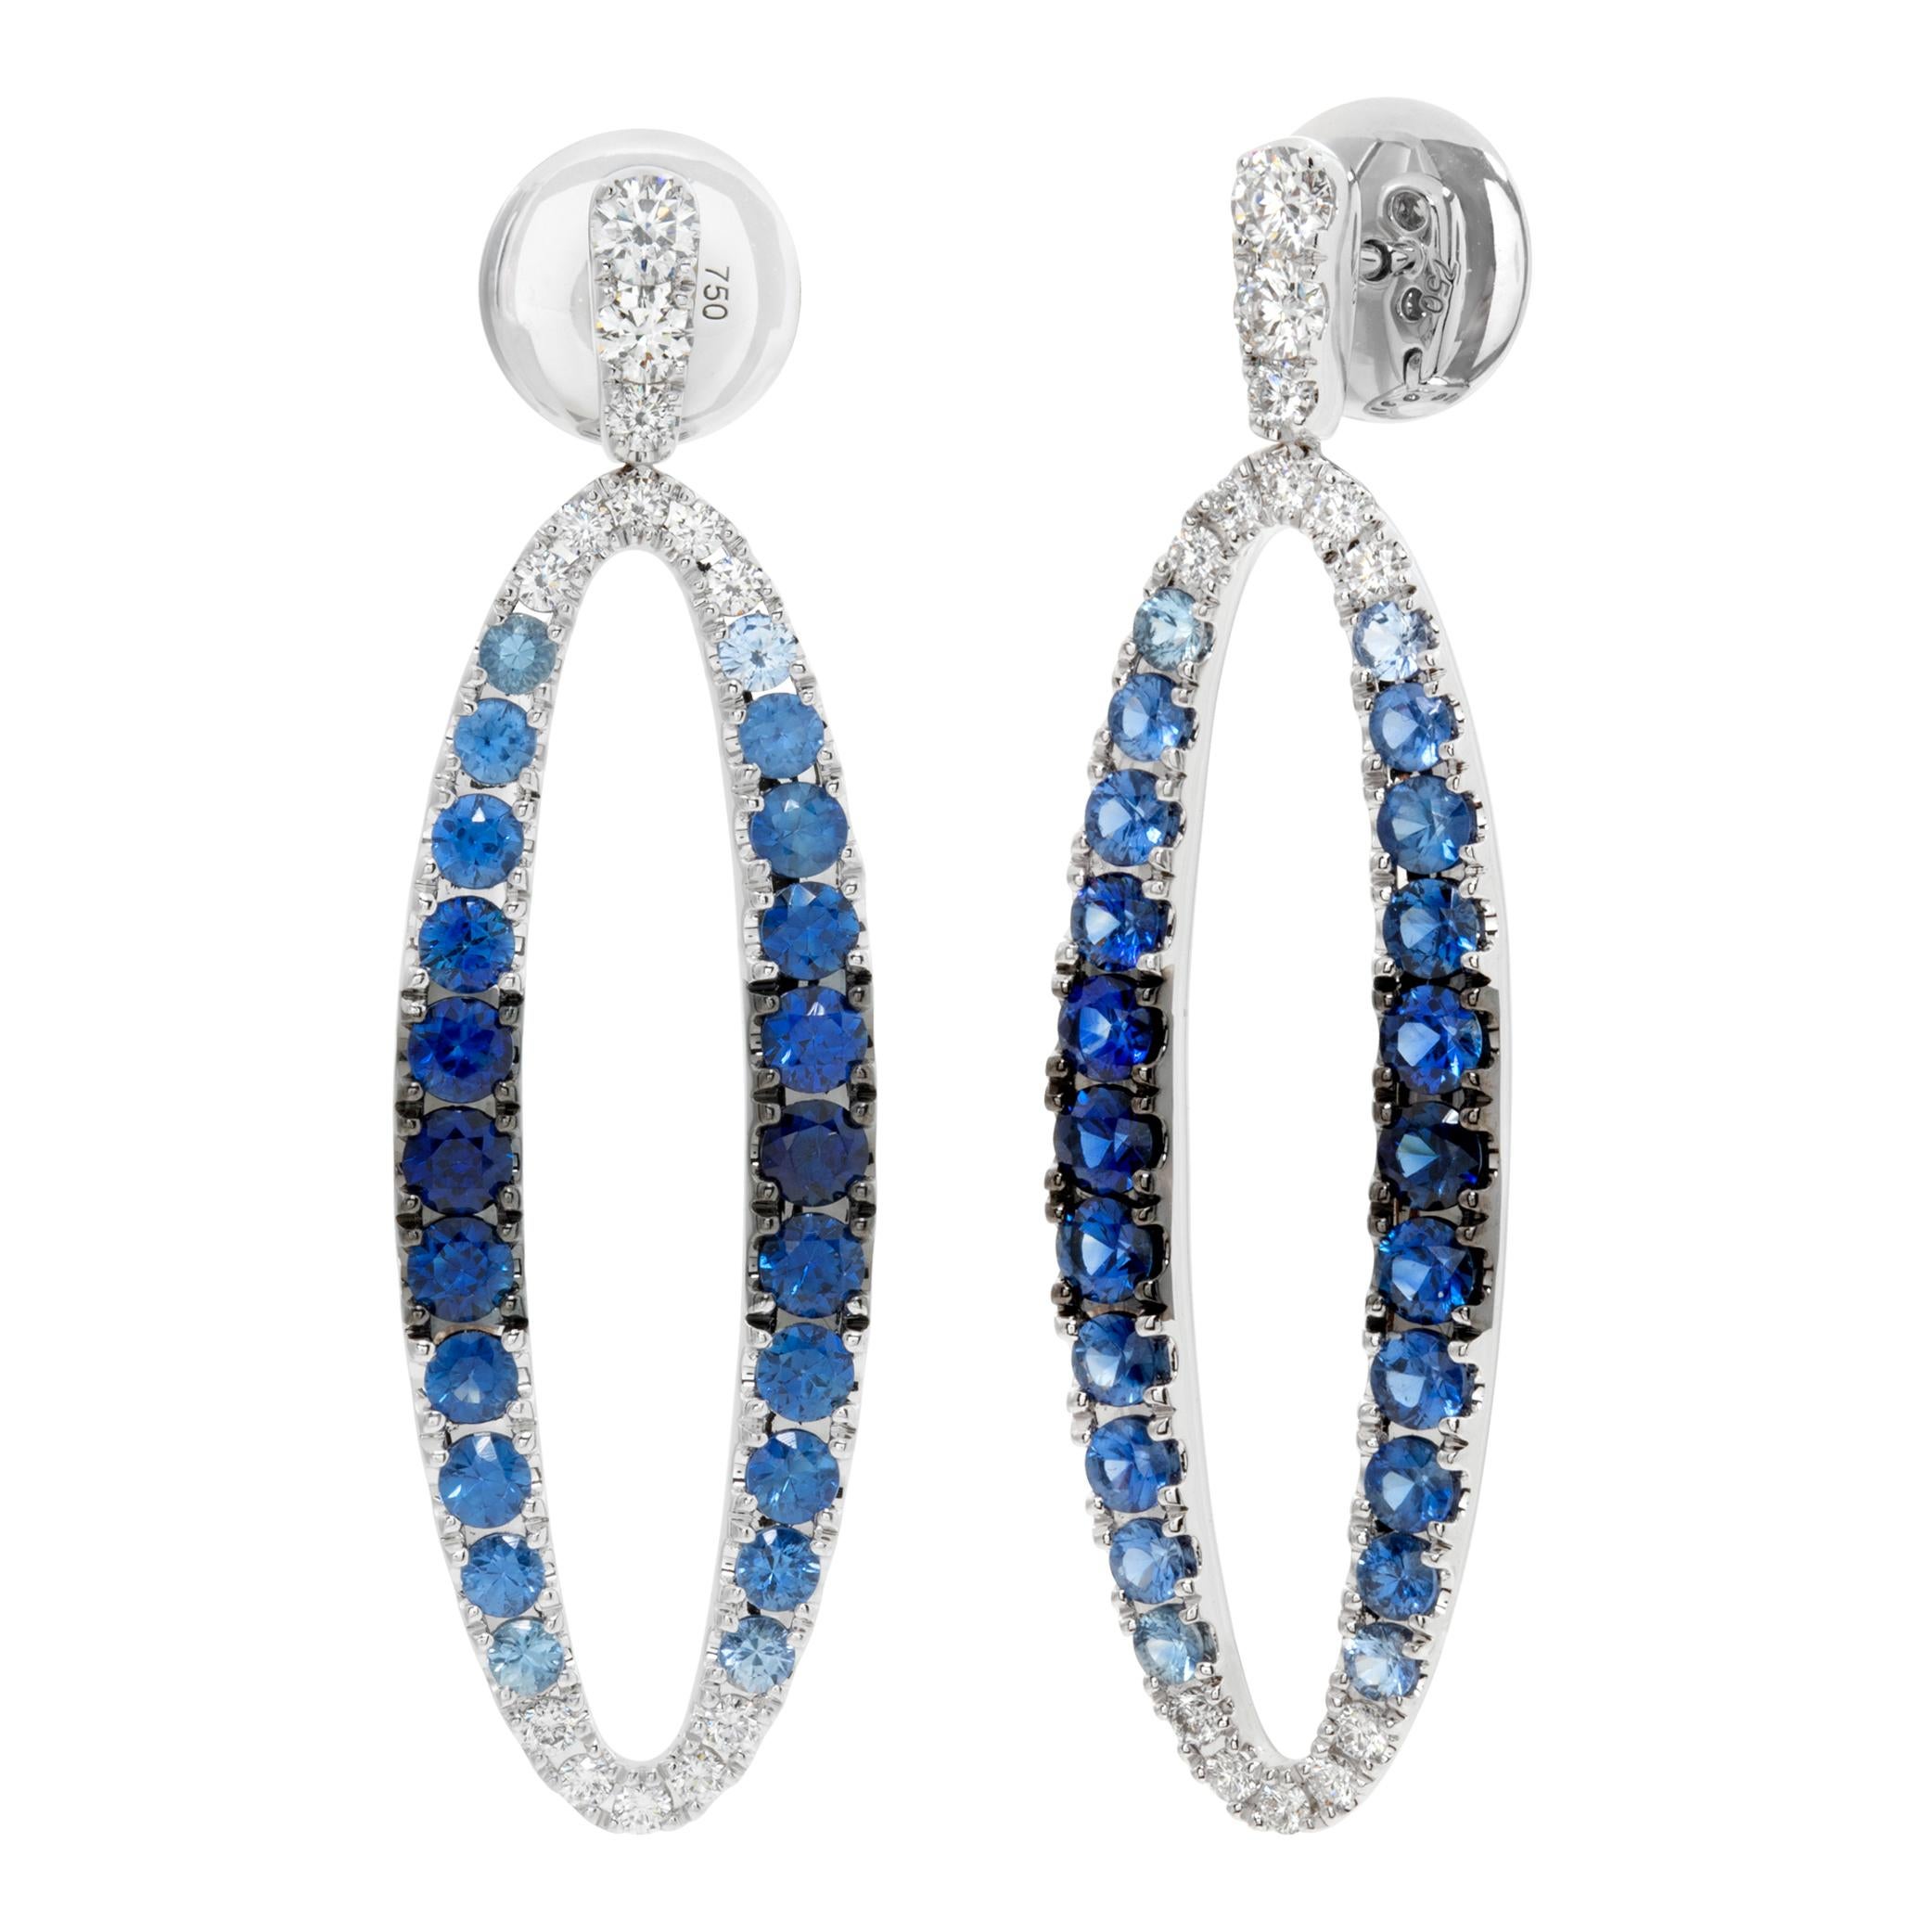 Divine 18k white gold drop earrings with 0.77 carat in diamonds and 4 carats in blue sapphires. Length 46mm x 13mm.